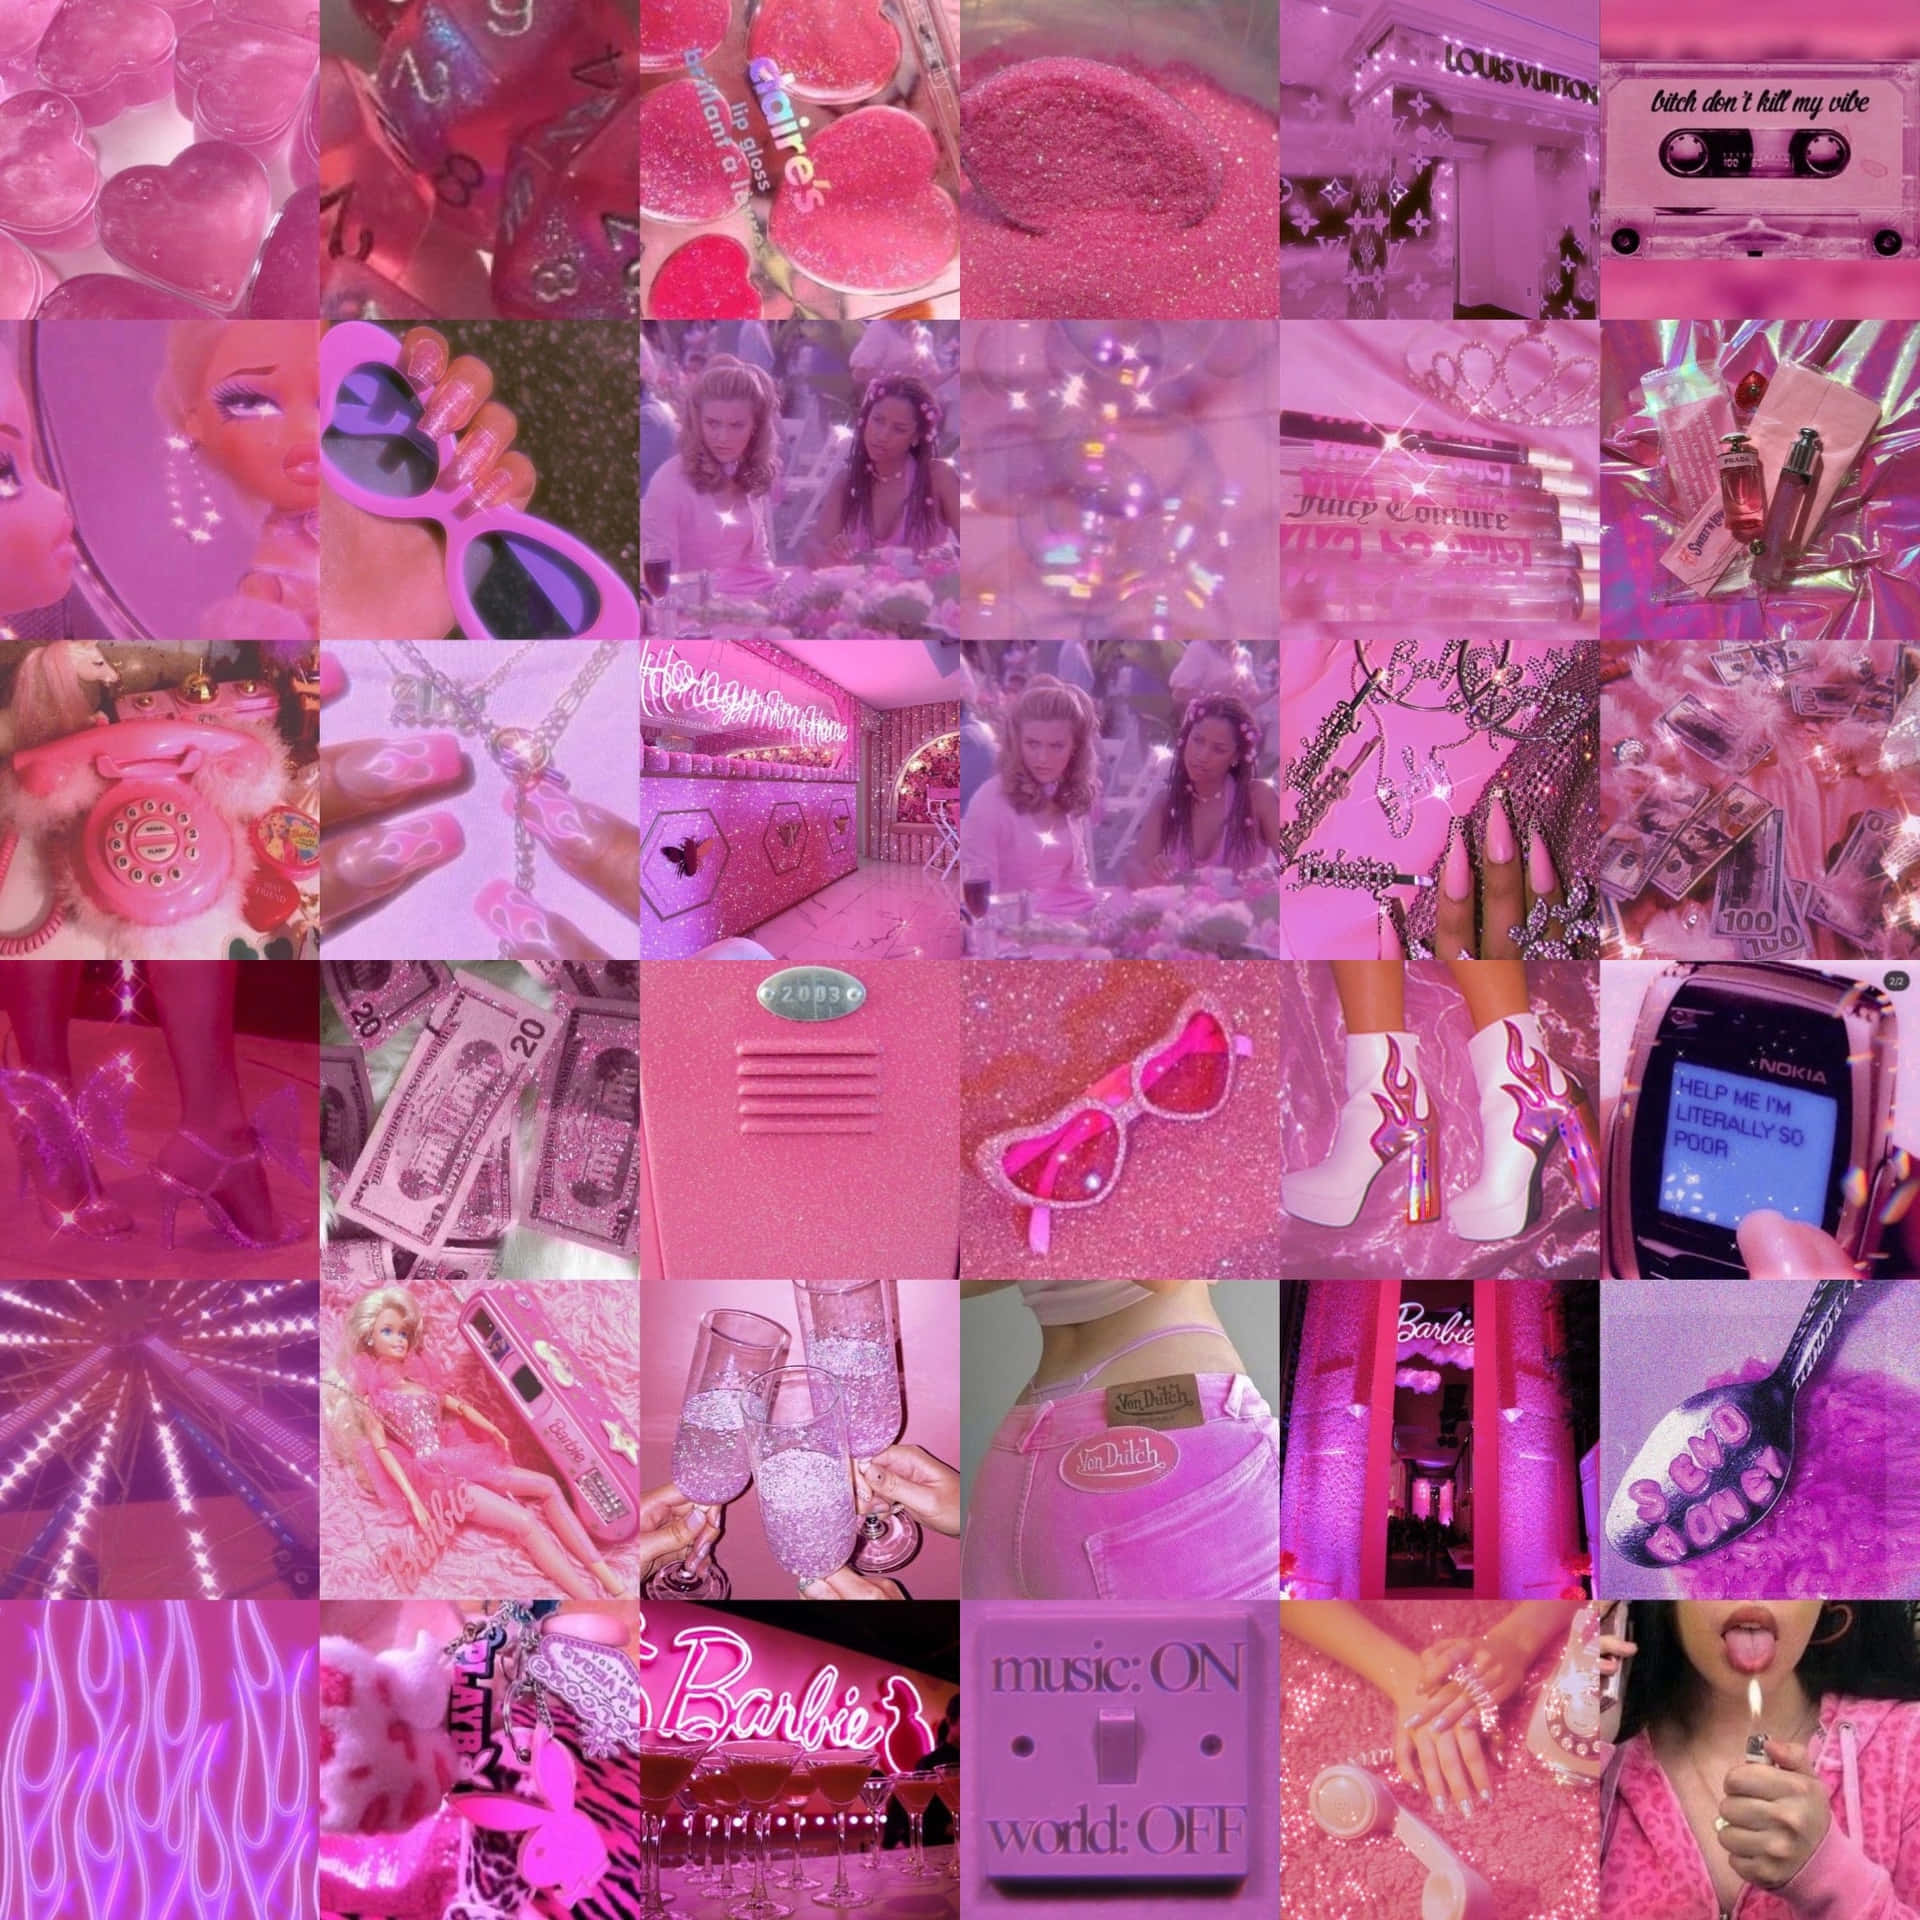 y2k wallpapers for iphone pink｜TikTok Search, y2k aesthetic wallpaper